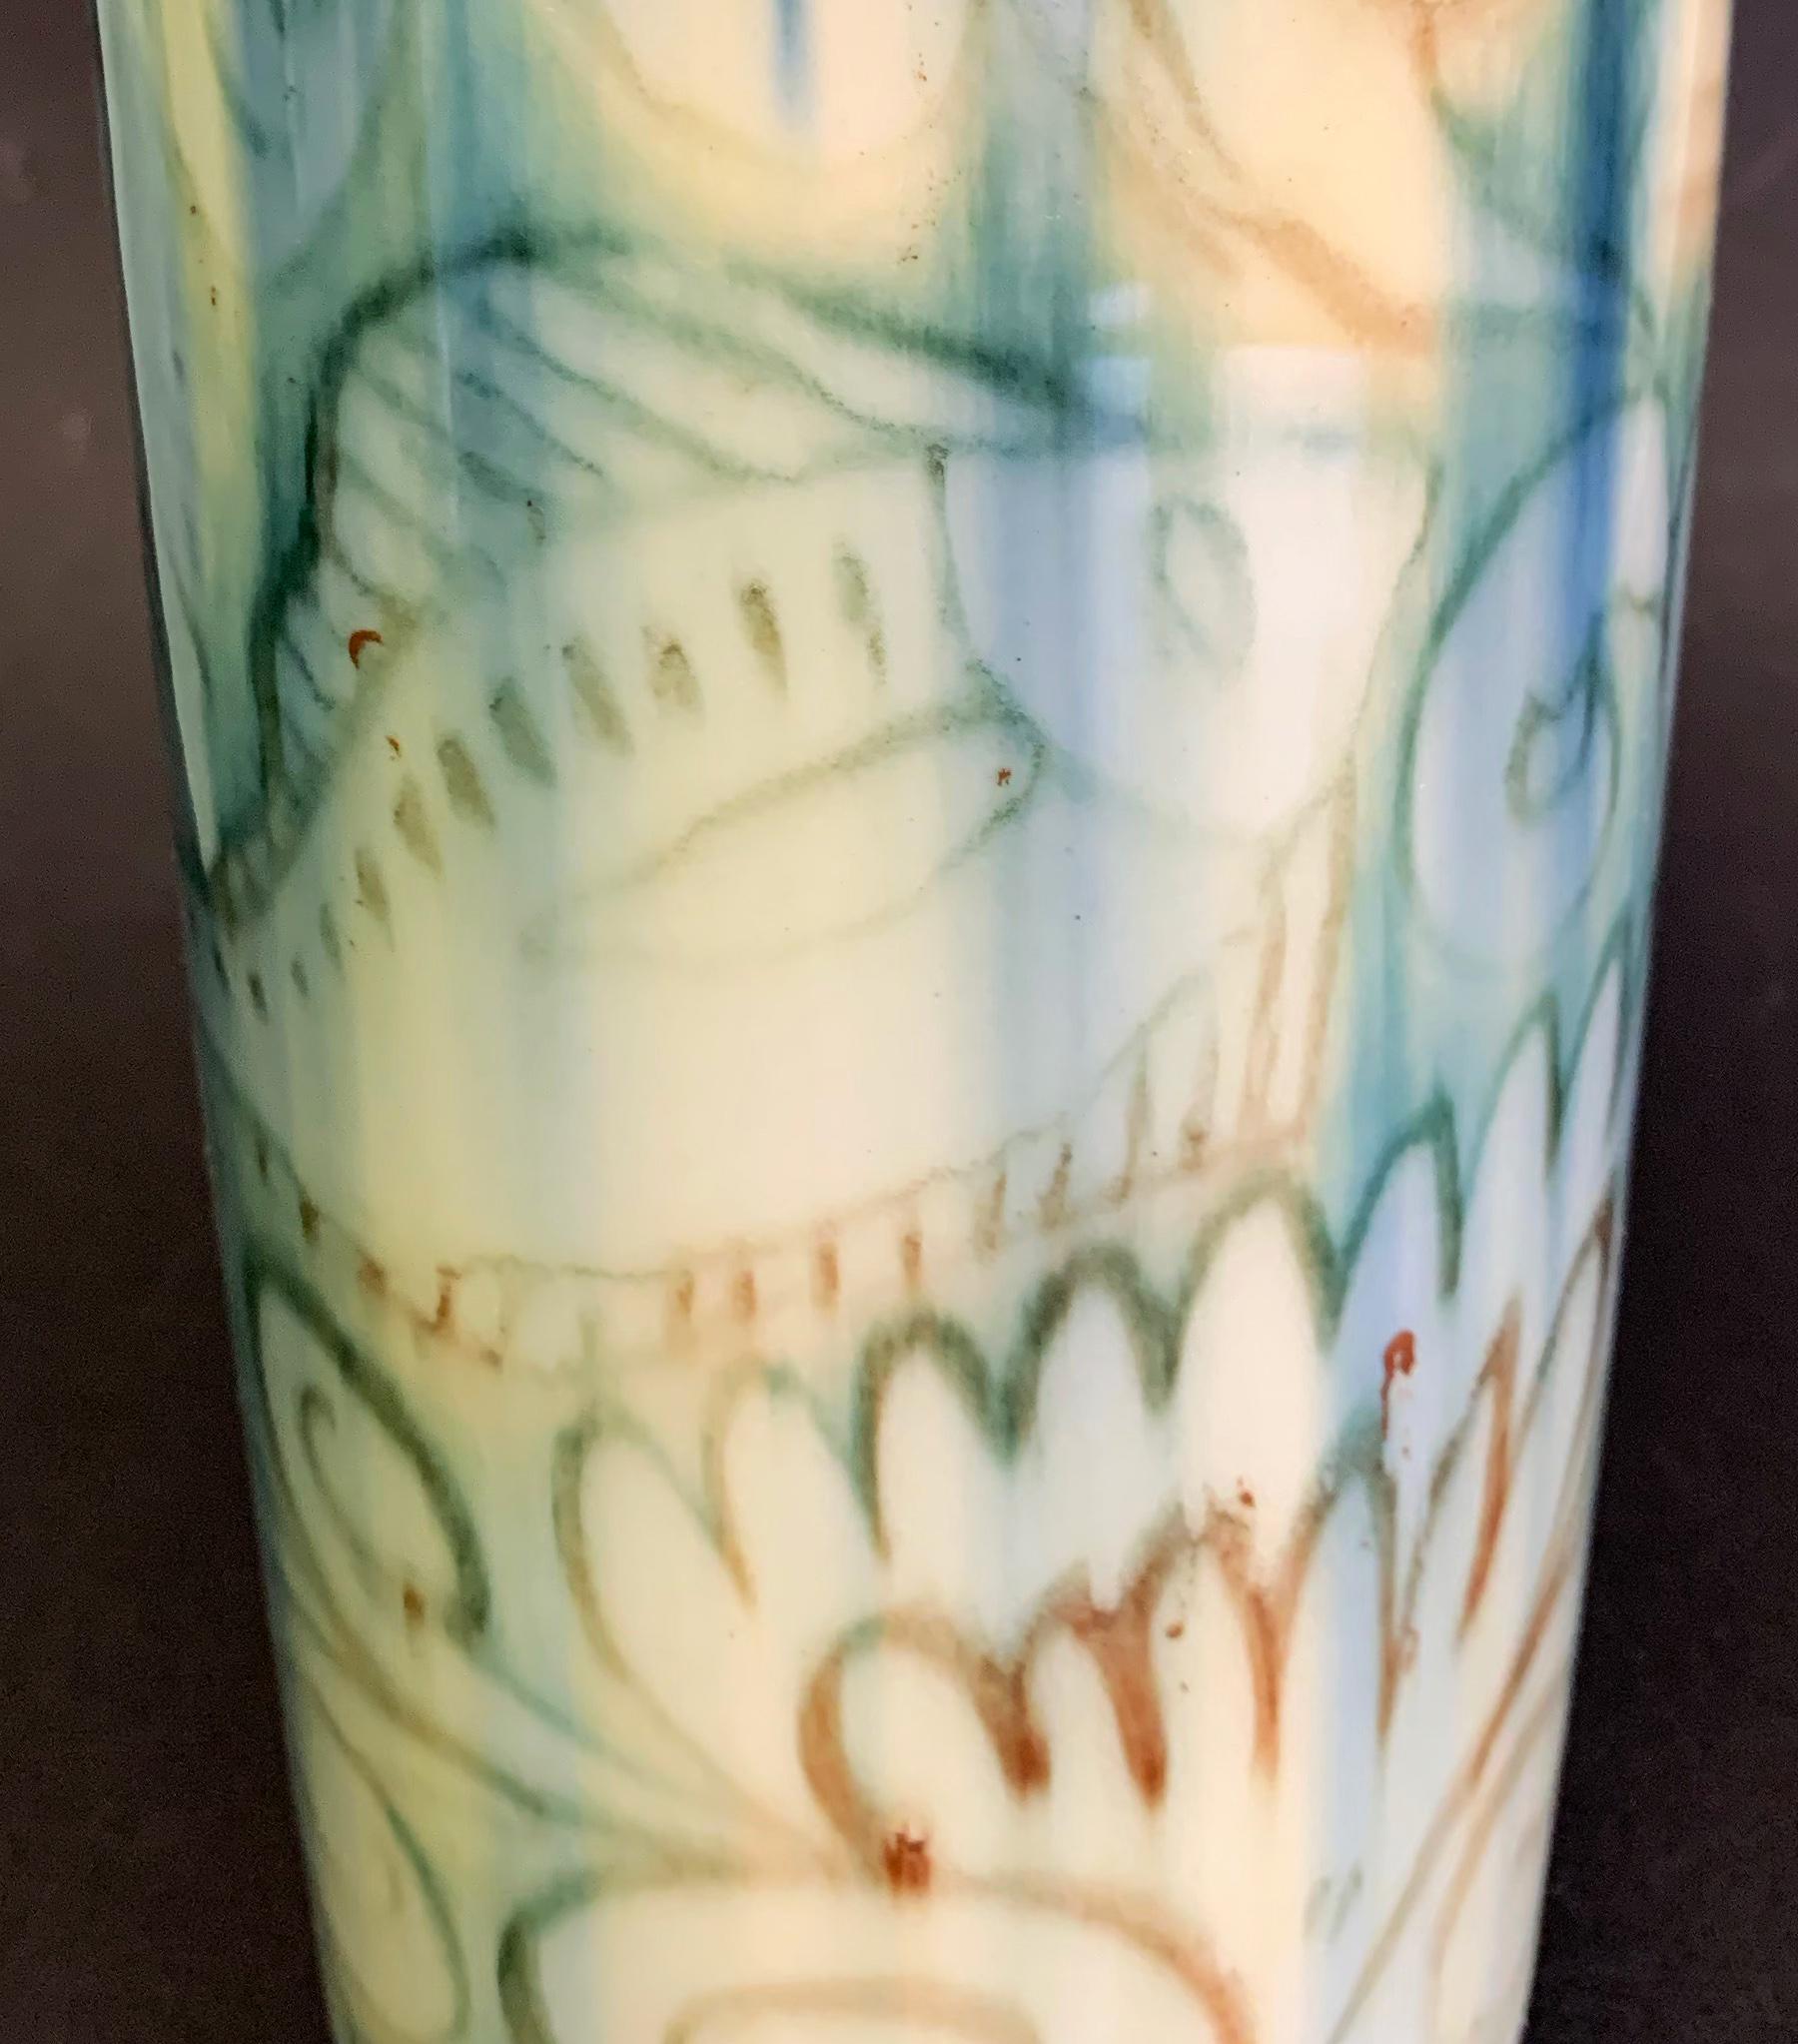 A marvelous, atmospheric example of Art Deco artisanry, this cylindrical vase by Jens Jensen for Rookwood Pottery depicts a fish swimming amidst moving water and tendrils of seaweed, all lit by the shifting light and shadows cast by the sun above.